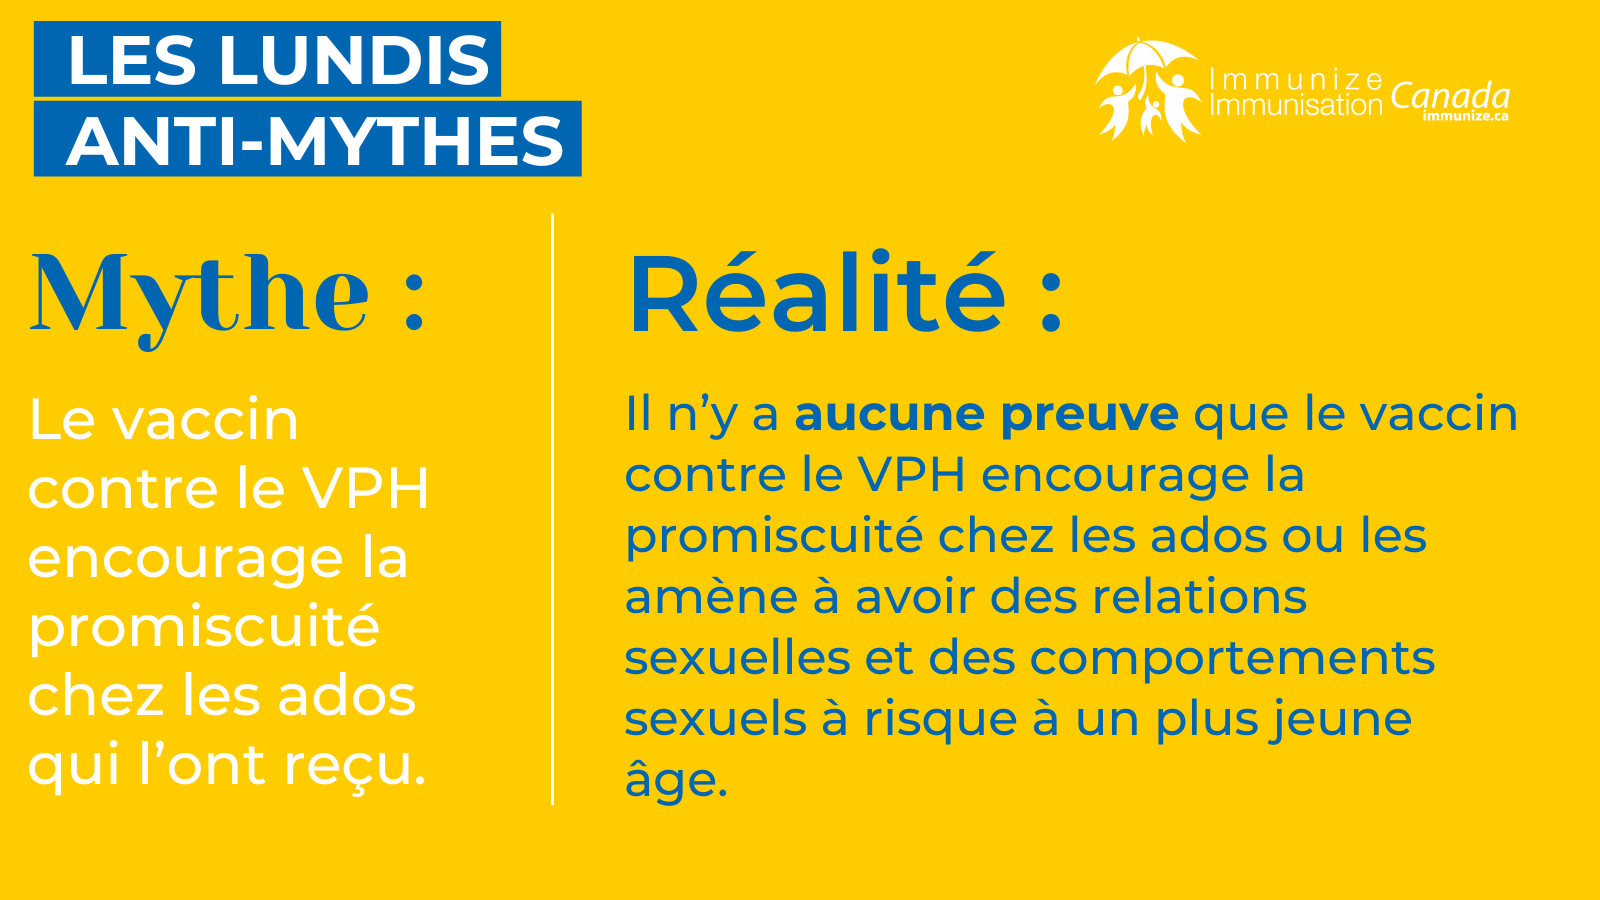 Lundis anti-mythes - image 2 pour Twitter